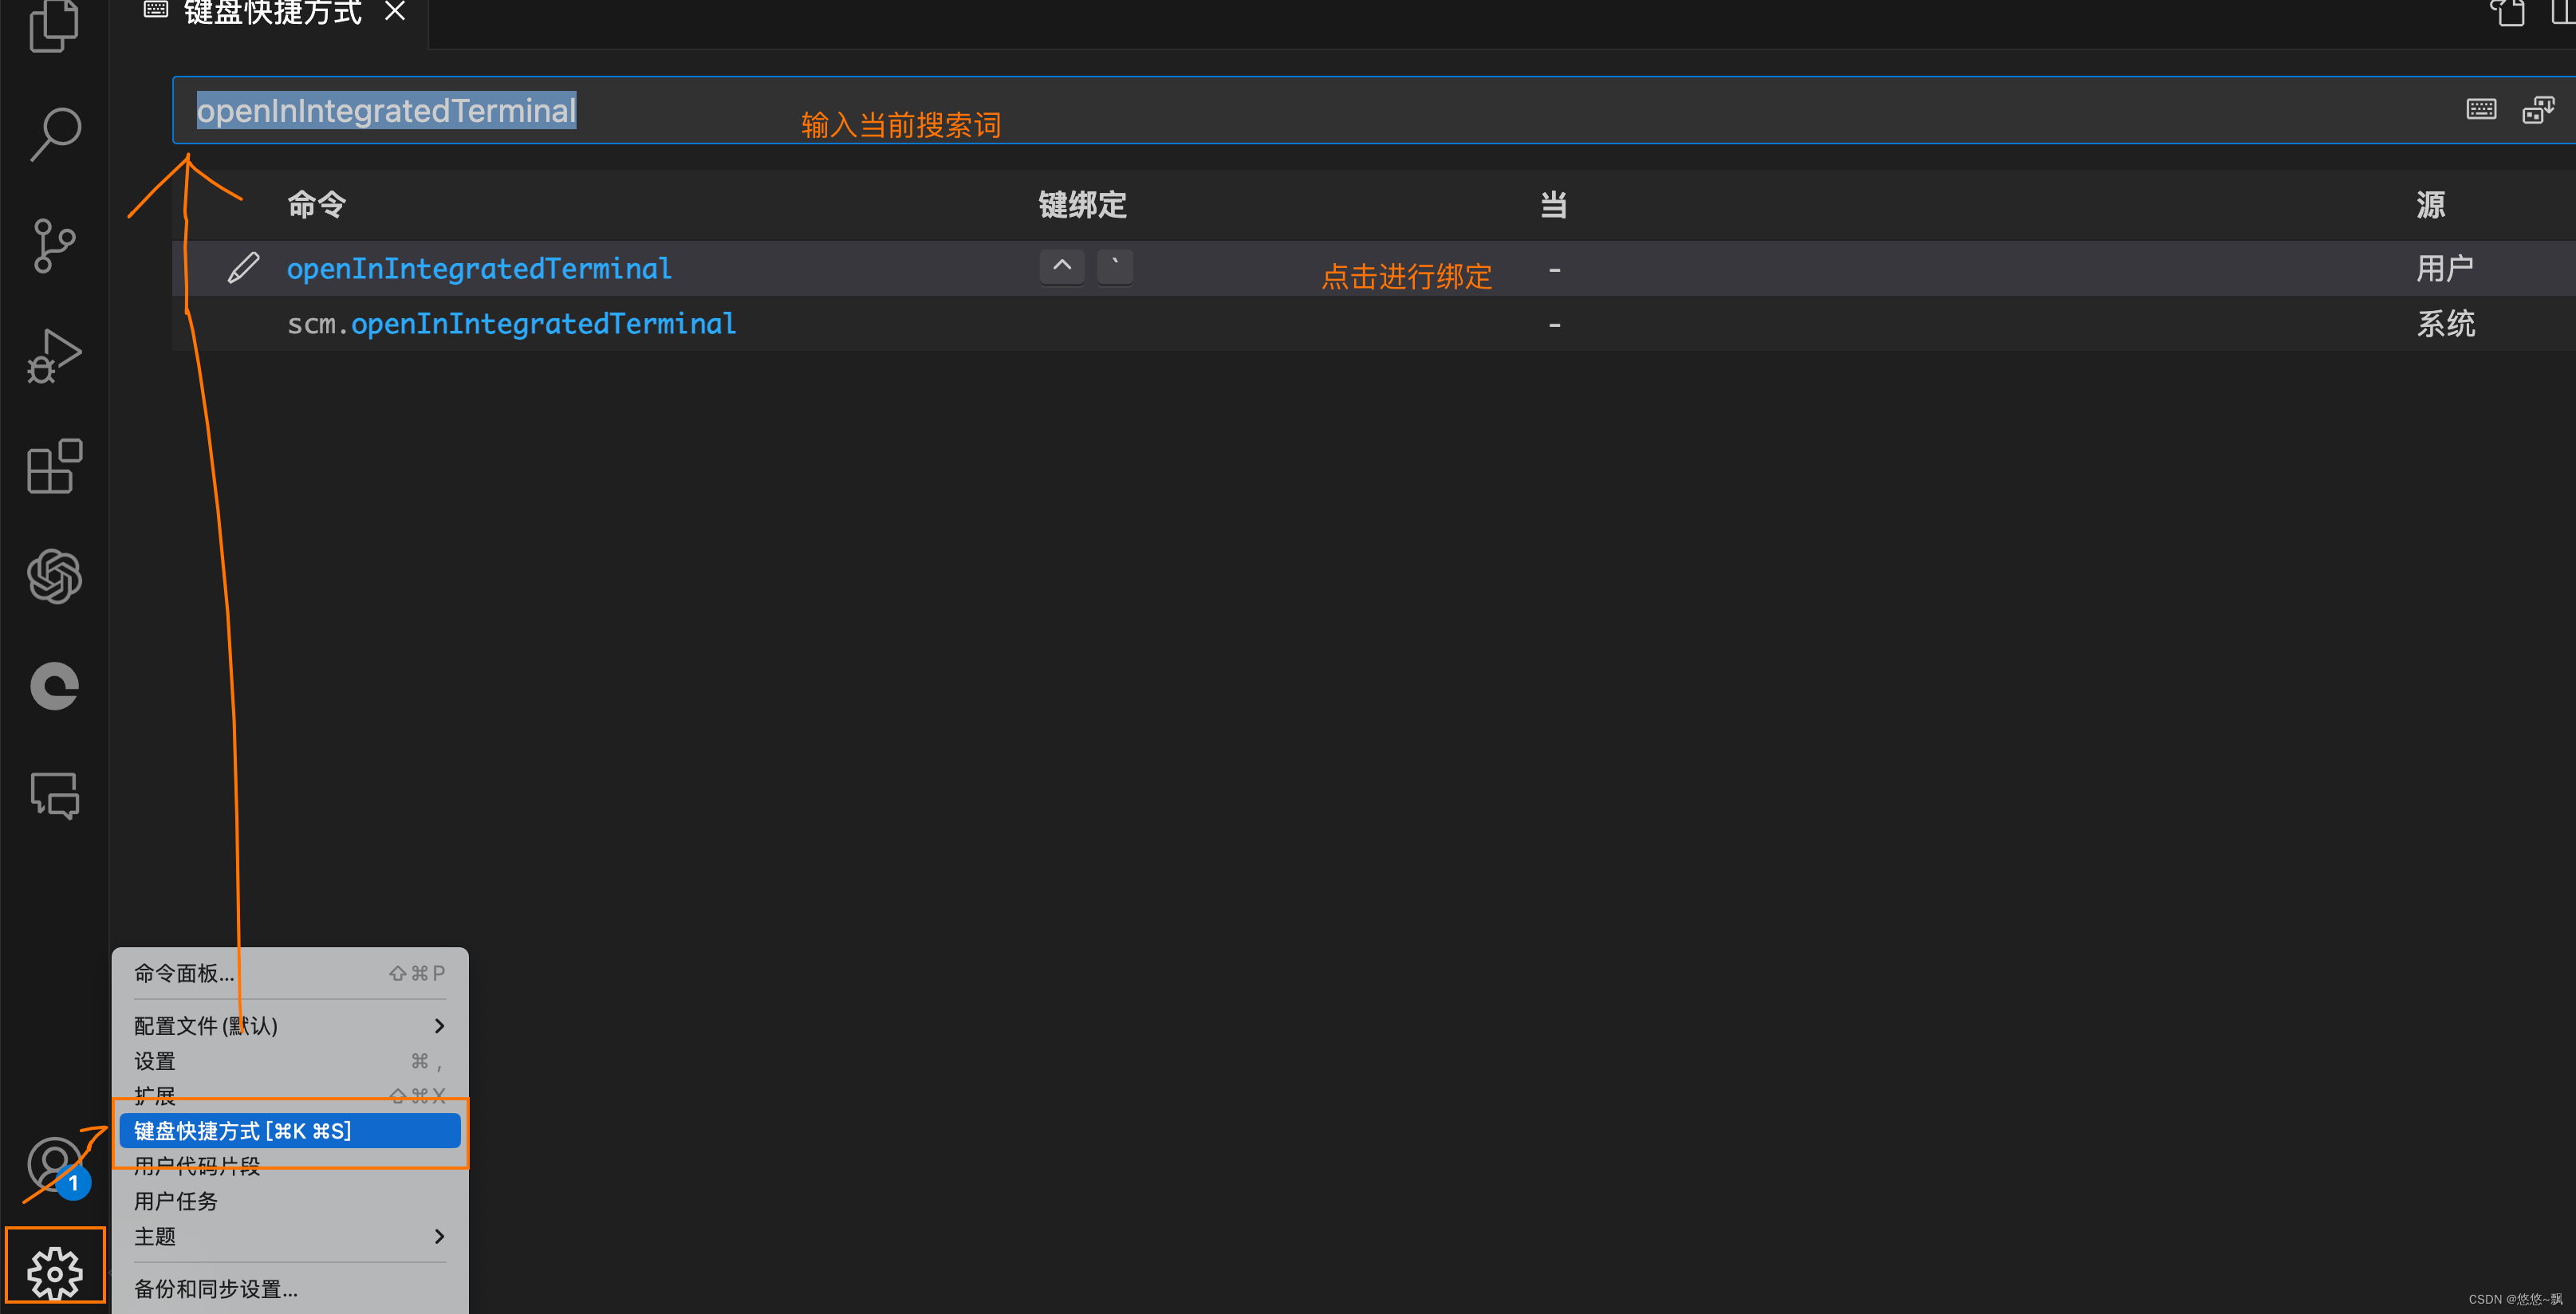 VScode 集成<span style='color:red;'>终端</span><span style='color:red;'>设置</span>默认打开当前文件夹 mac<span style='color:red;'>系统</span>